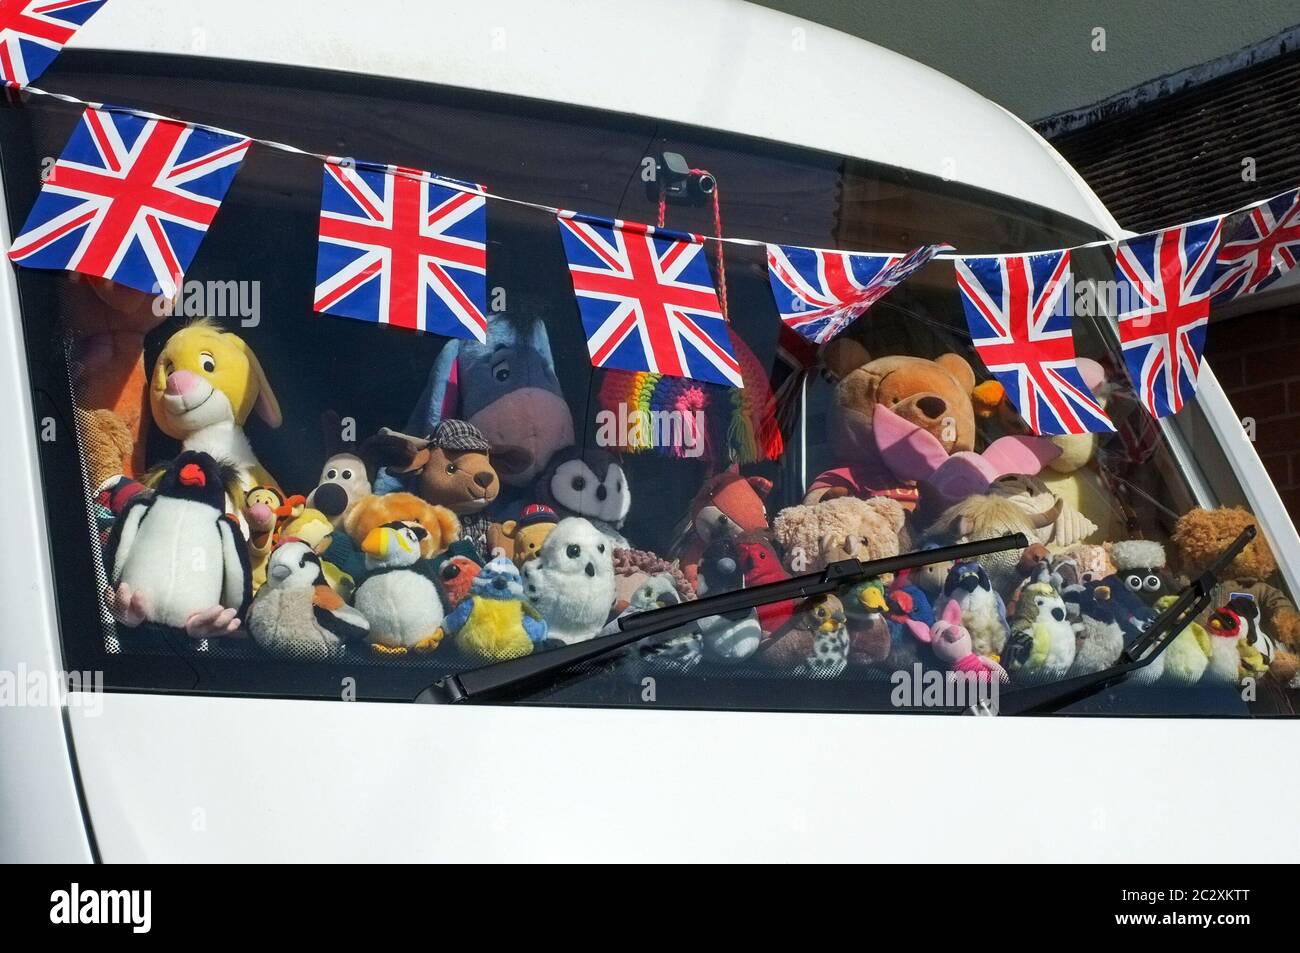 Proudly displaying the UK Union Flag - A camper van dashboard covered with stuffed toys during the VE day 75th celebrations in May 2020. Wilton Wiltshire UK. Stock Photo